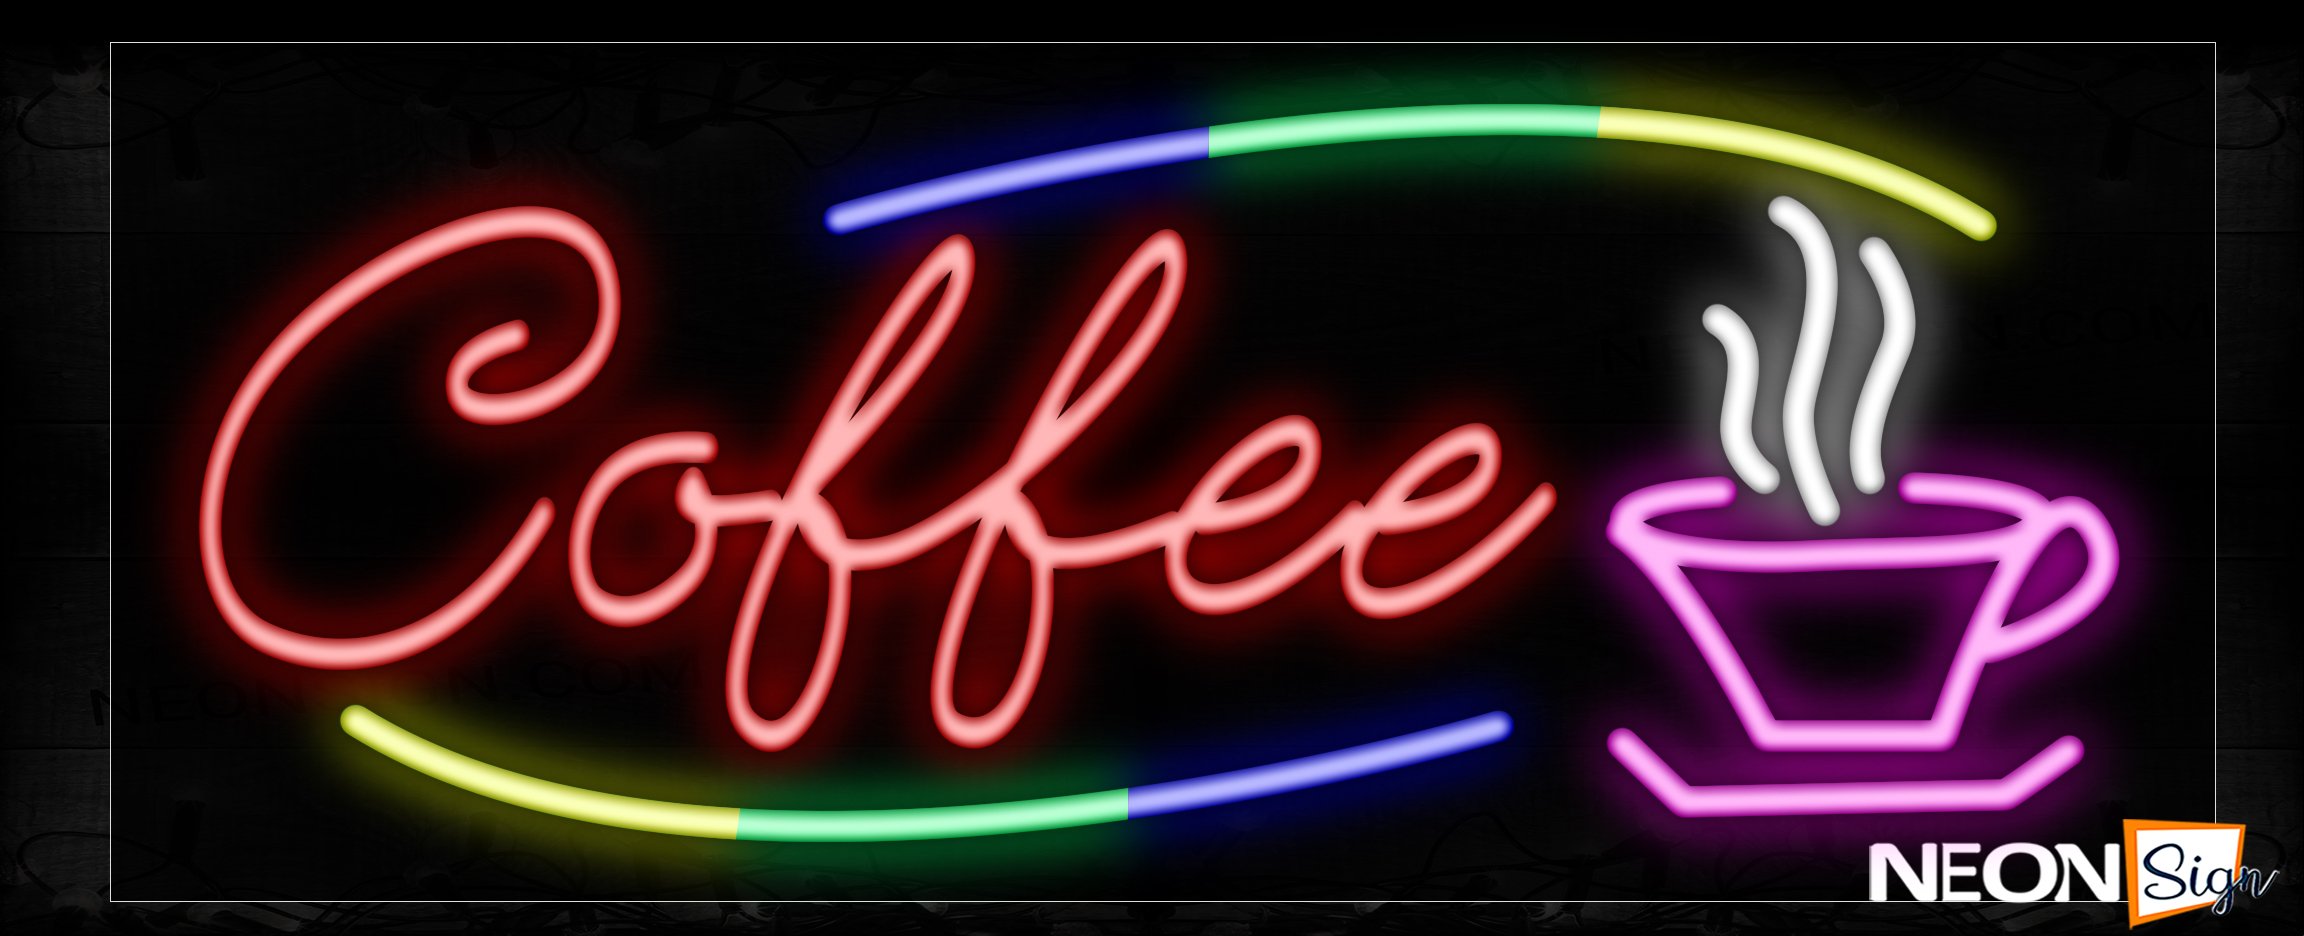 Image of 10773 Coffee With Cup Arc Border Neon Signs_13x32 Black Backing